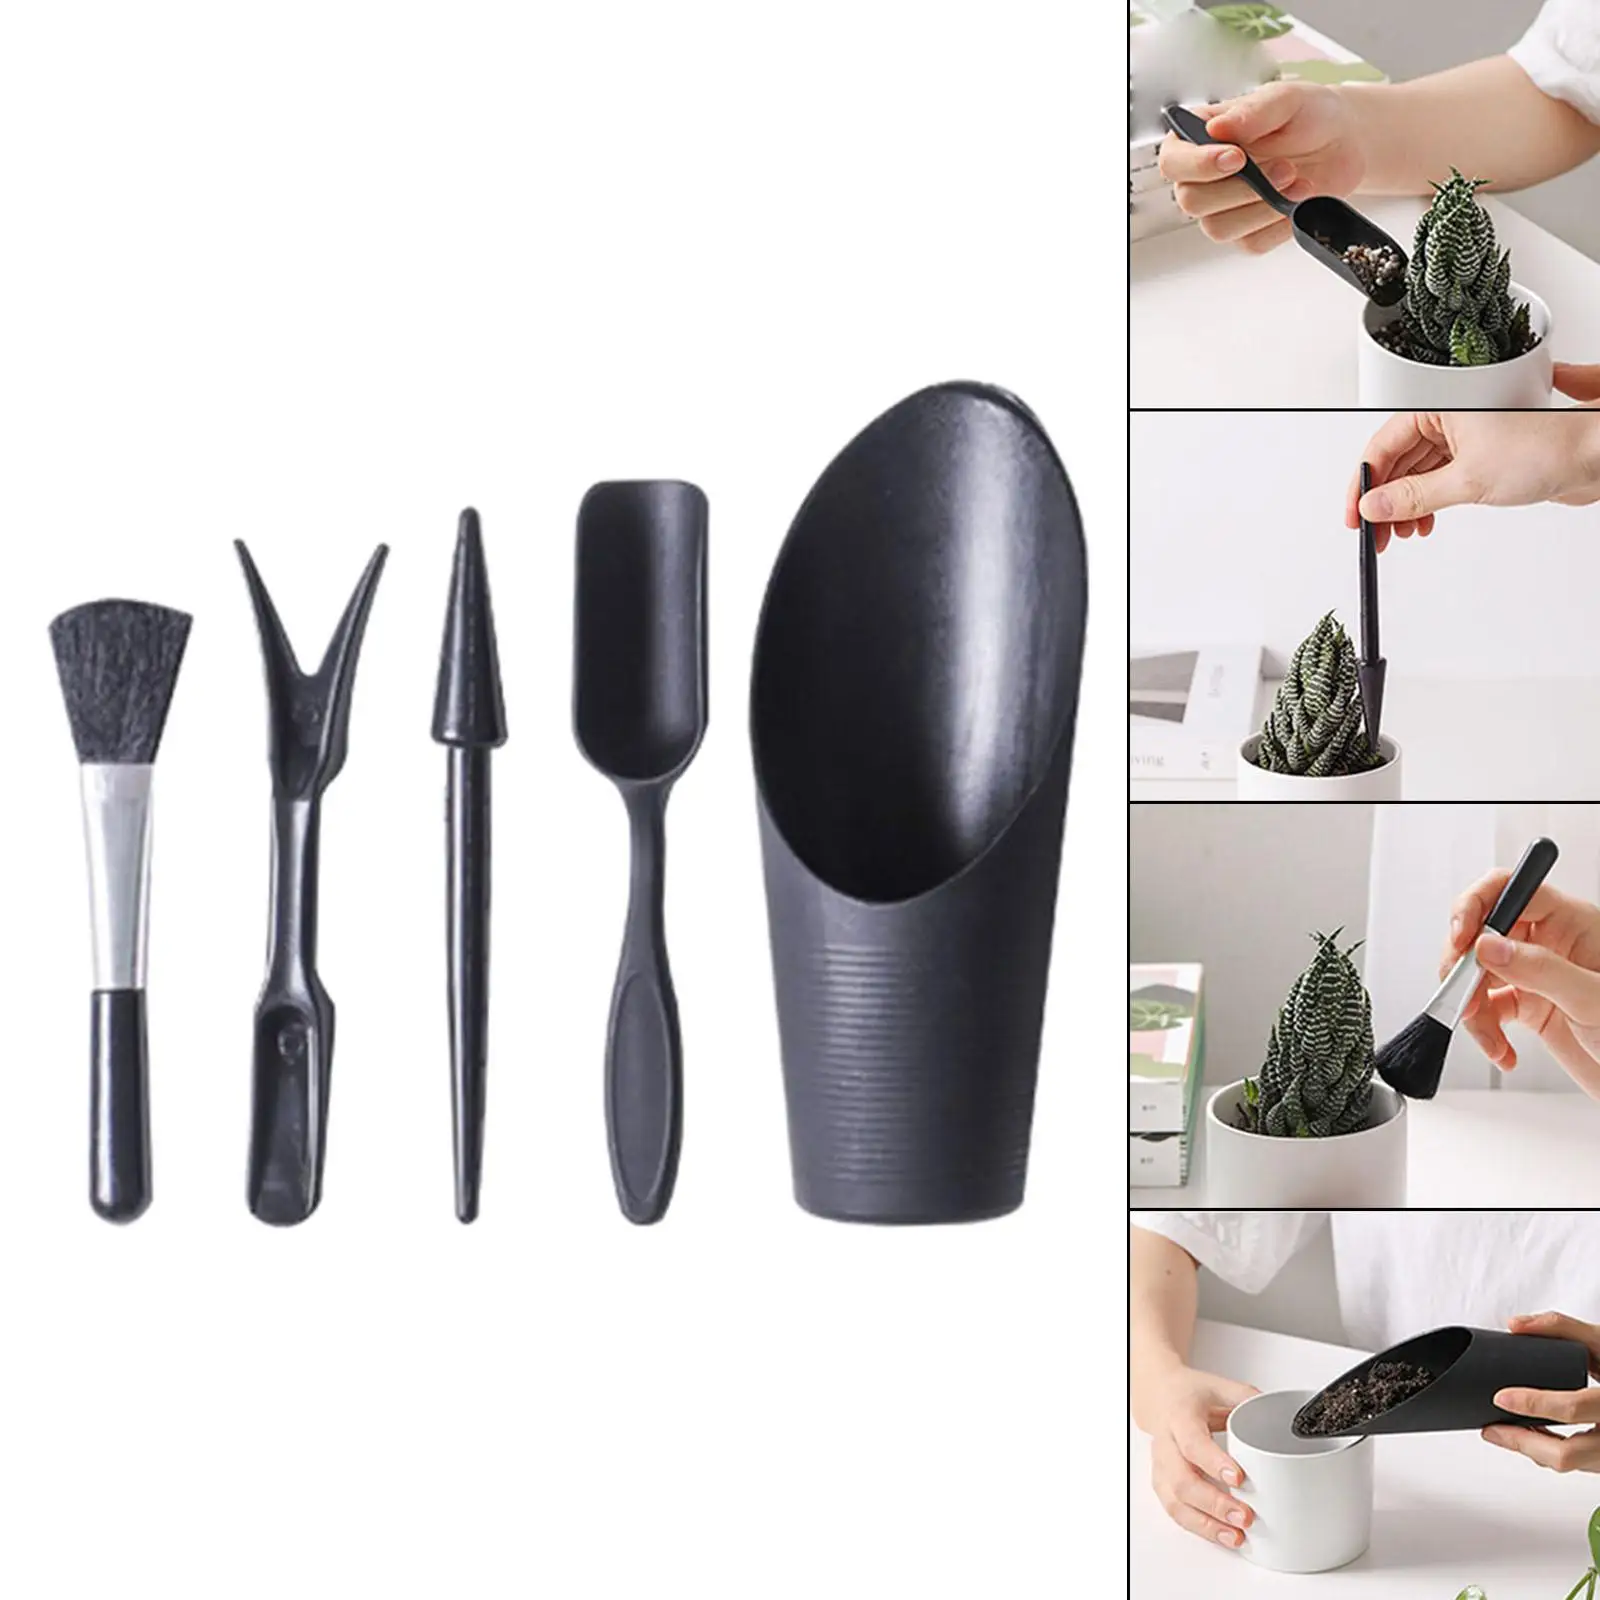 Mini Garden Succulent Transplanting Tools 5 Pieces for Miniature Planting Accessory Lightweight Simple to Use Professional